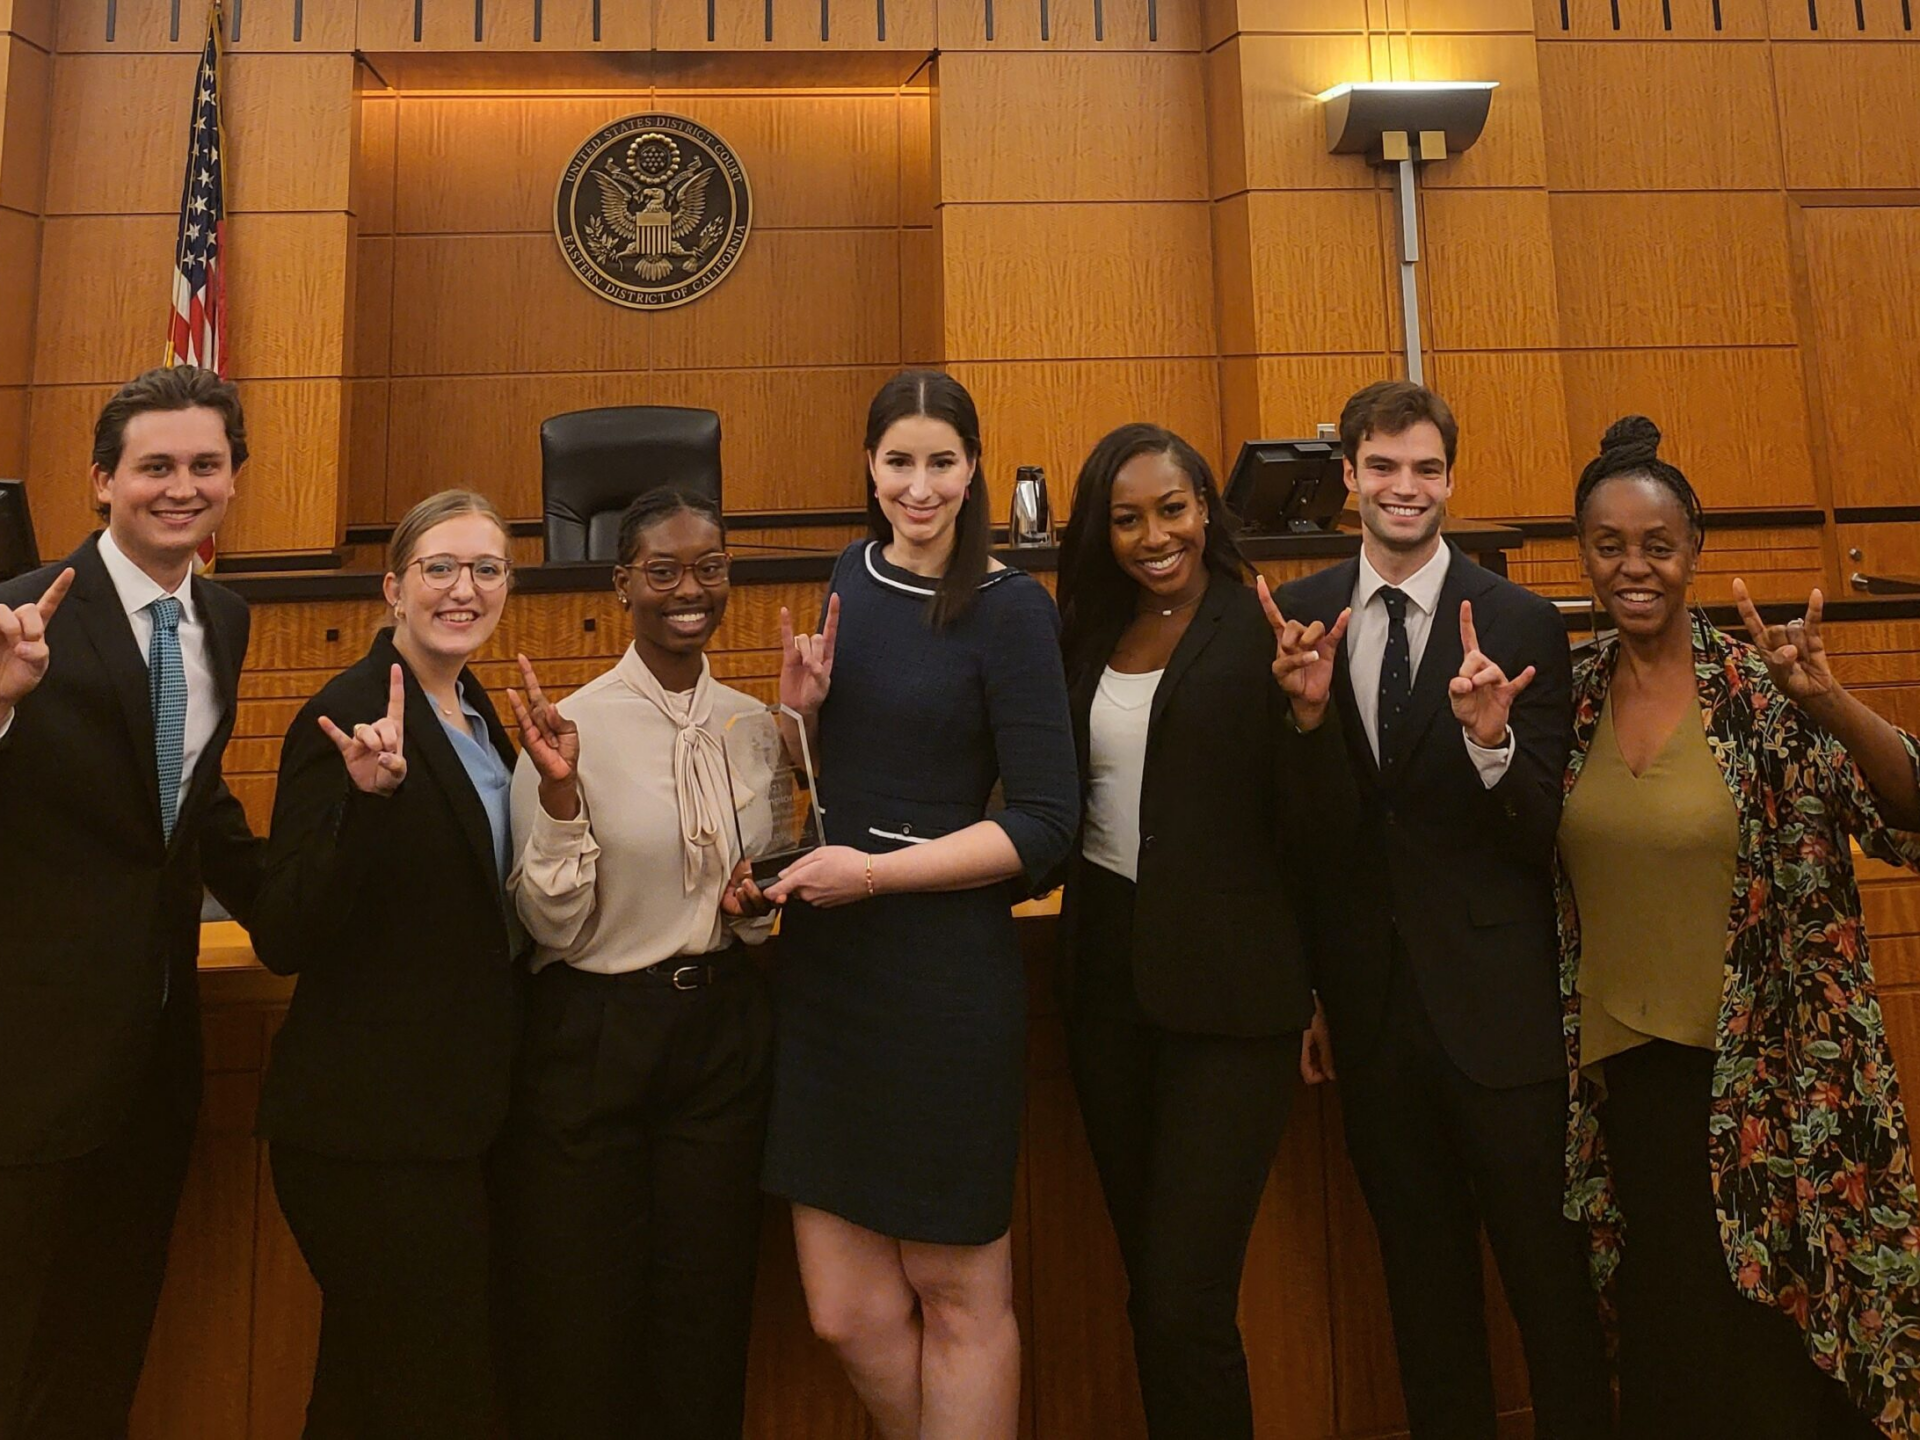 group standing in front of courtroom holding trophy and showing hook ’em hand signs